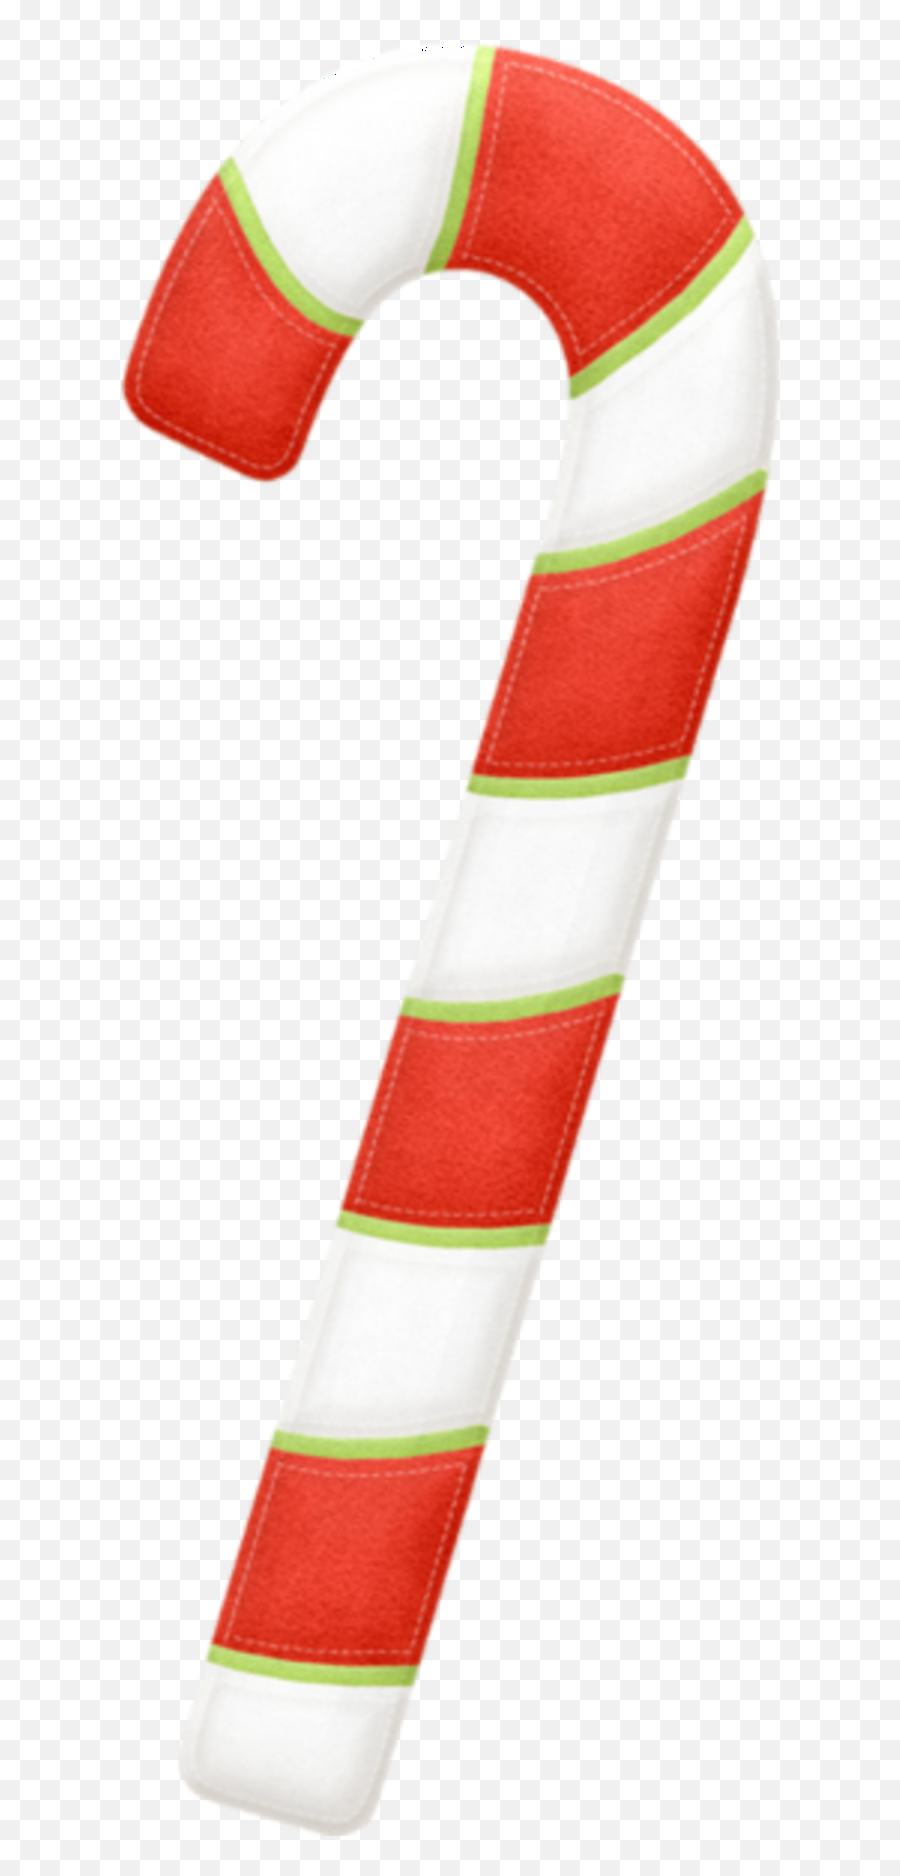 Popular And Trending Candy Cane Stickers On Picsart - Candy Cane Emoji,Candycane Emoji